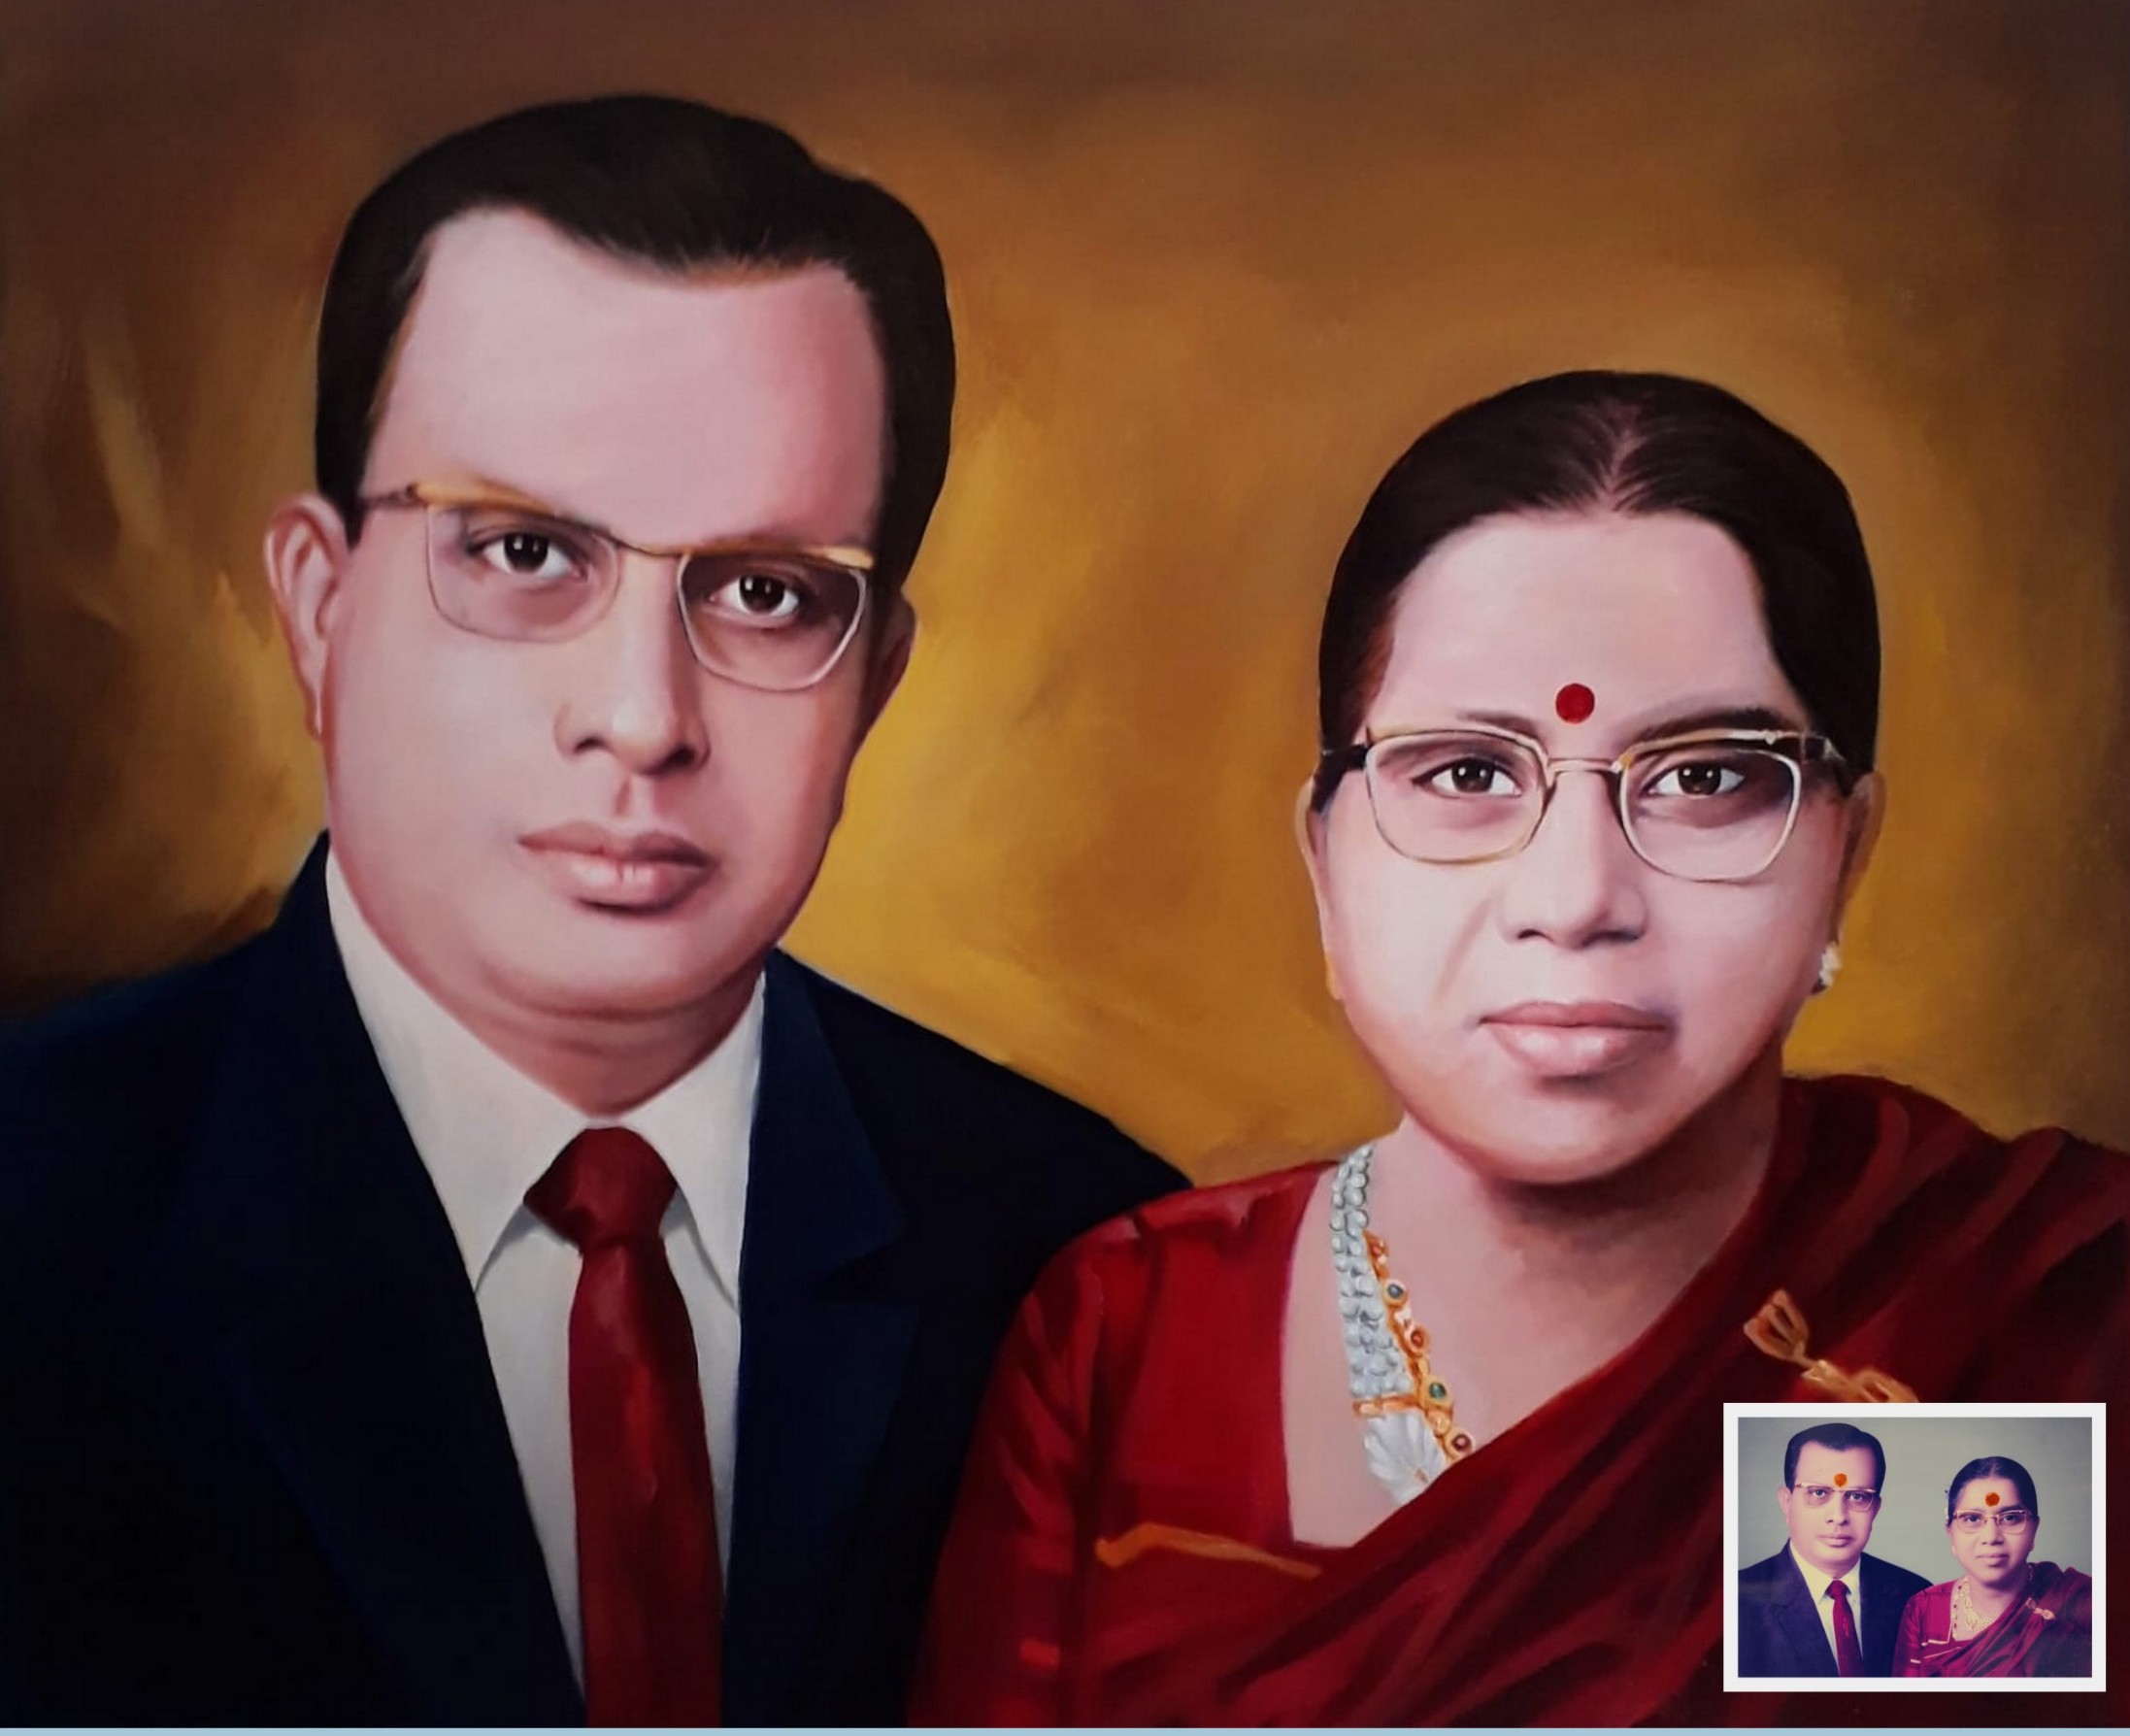 old photo to new painting, painting from old photo, photo to painting, memorial portrait painting,  